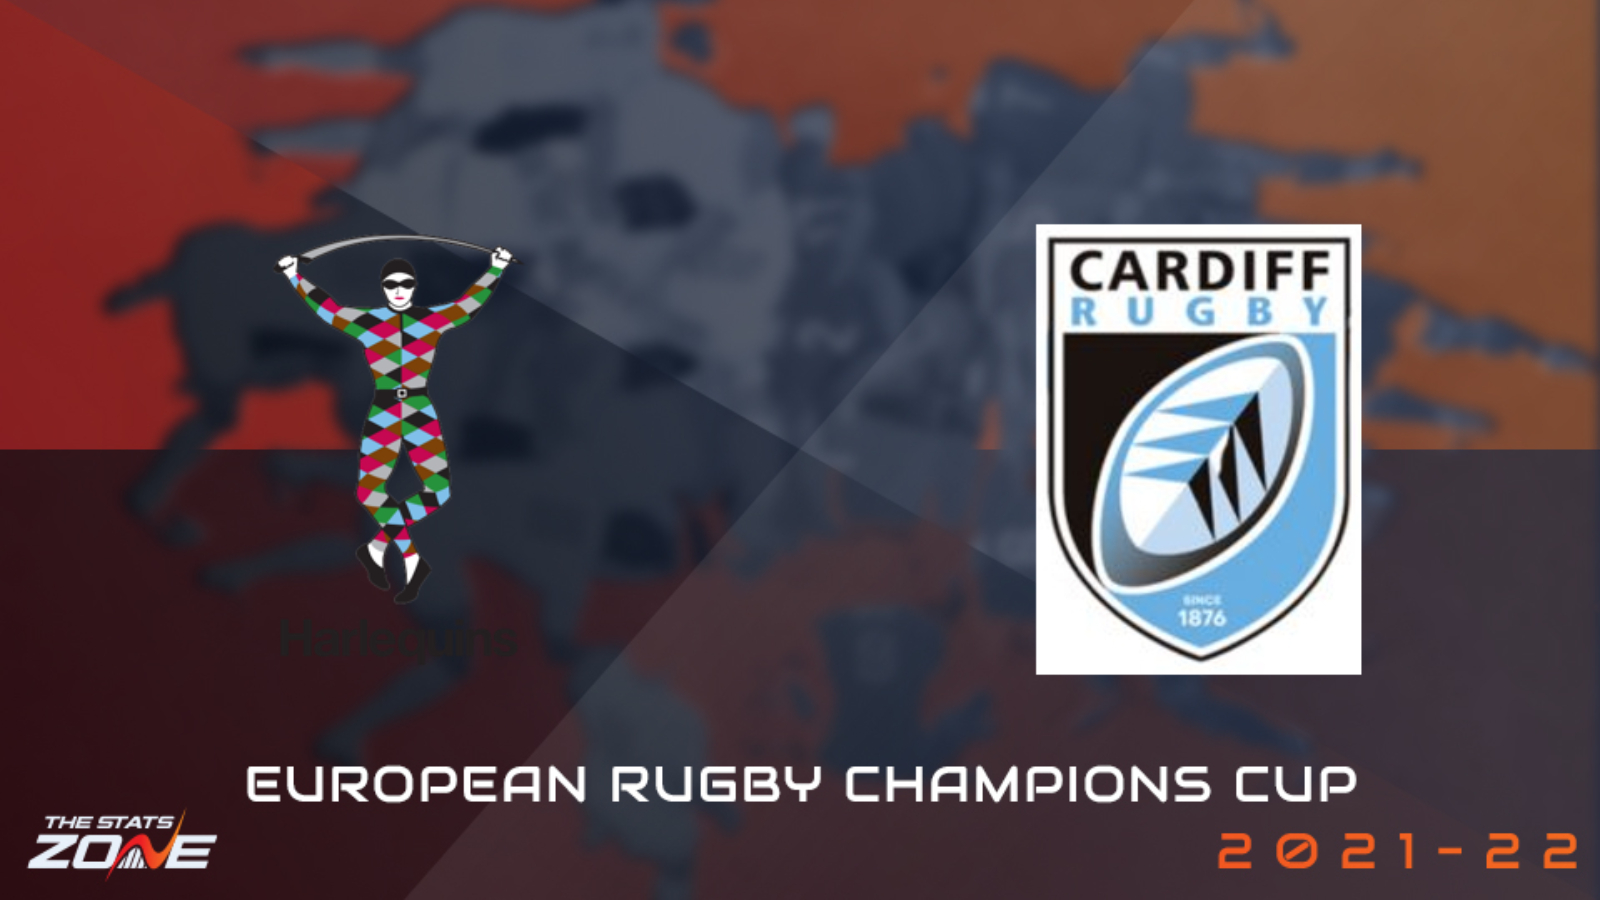 Harlequins vs Cardiff Rugby Preview and Prediction